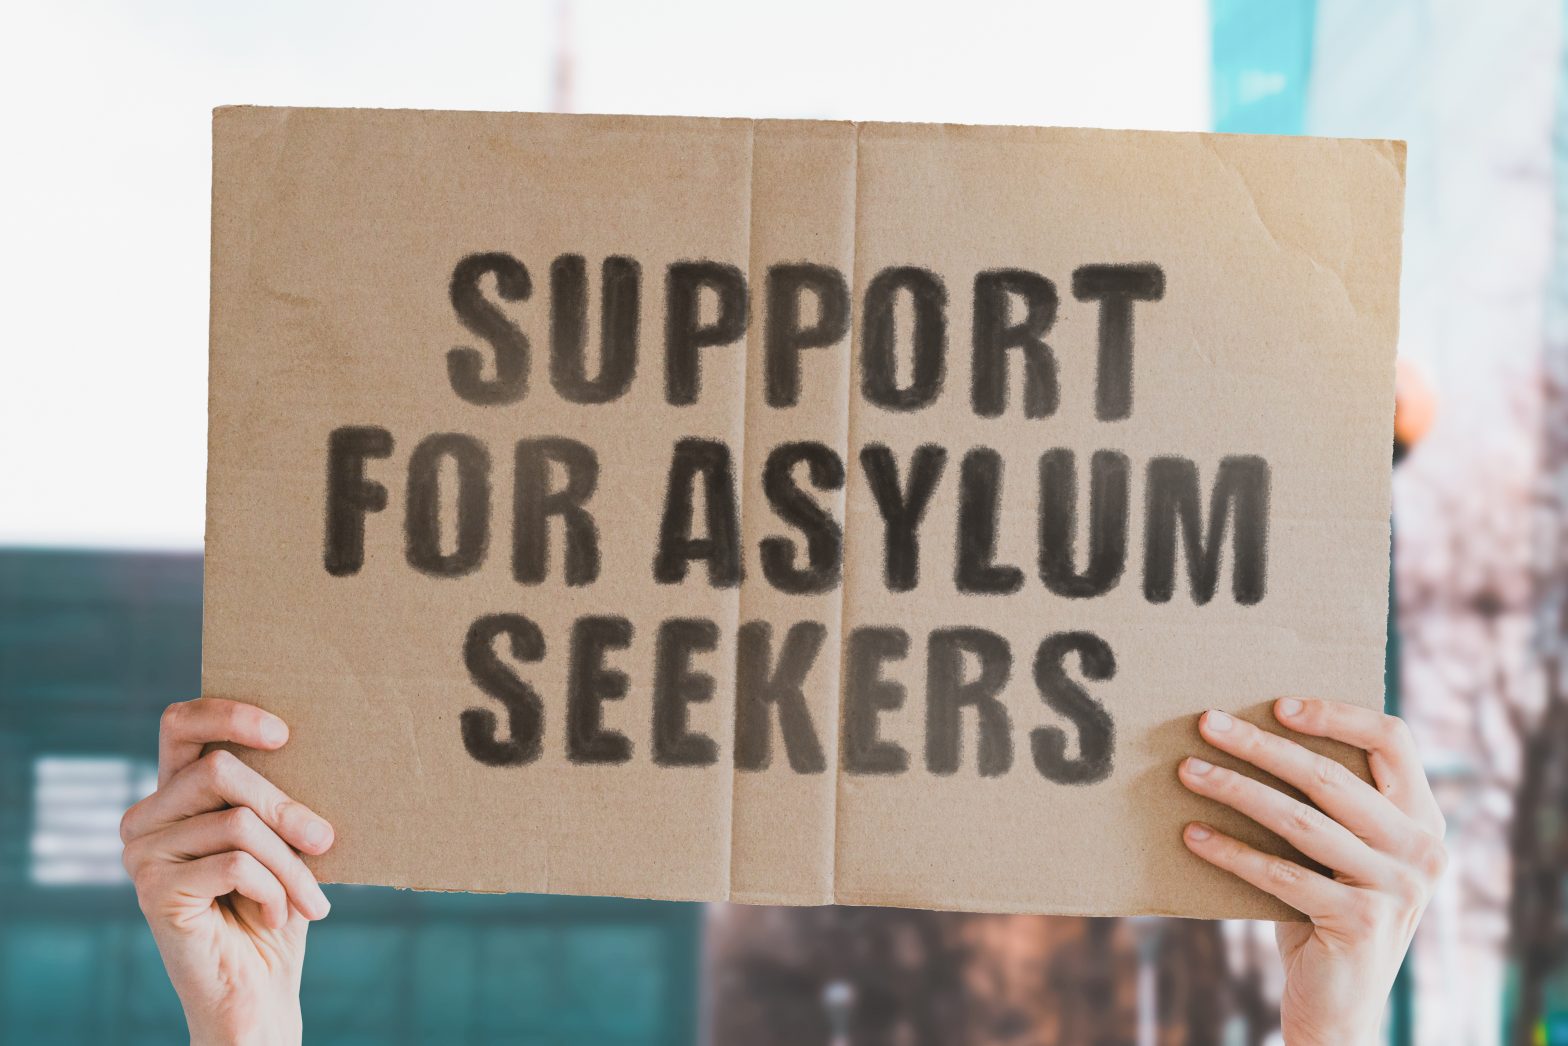 The phrase " Support for asylum seekers " on a banner in men's hand with blurred background. Immigrants. Refugees. Immigration. Charity. Help. Human rights. Shelter. Donation